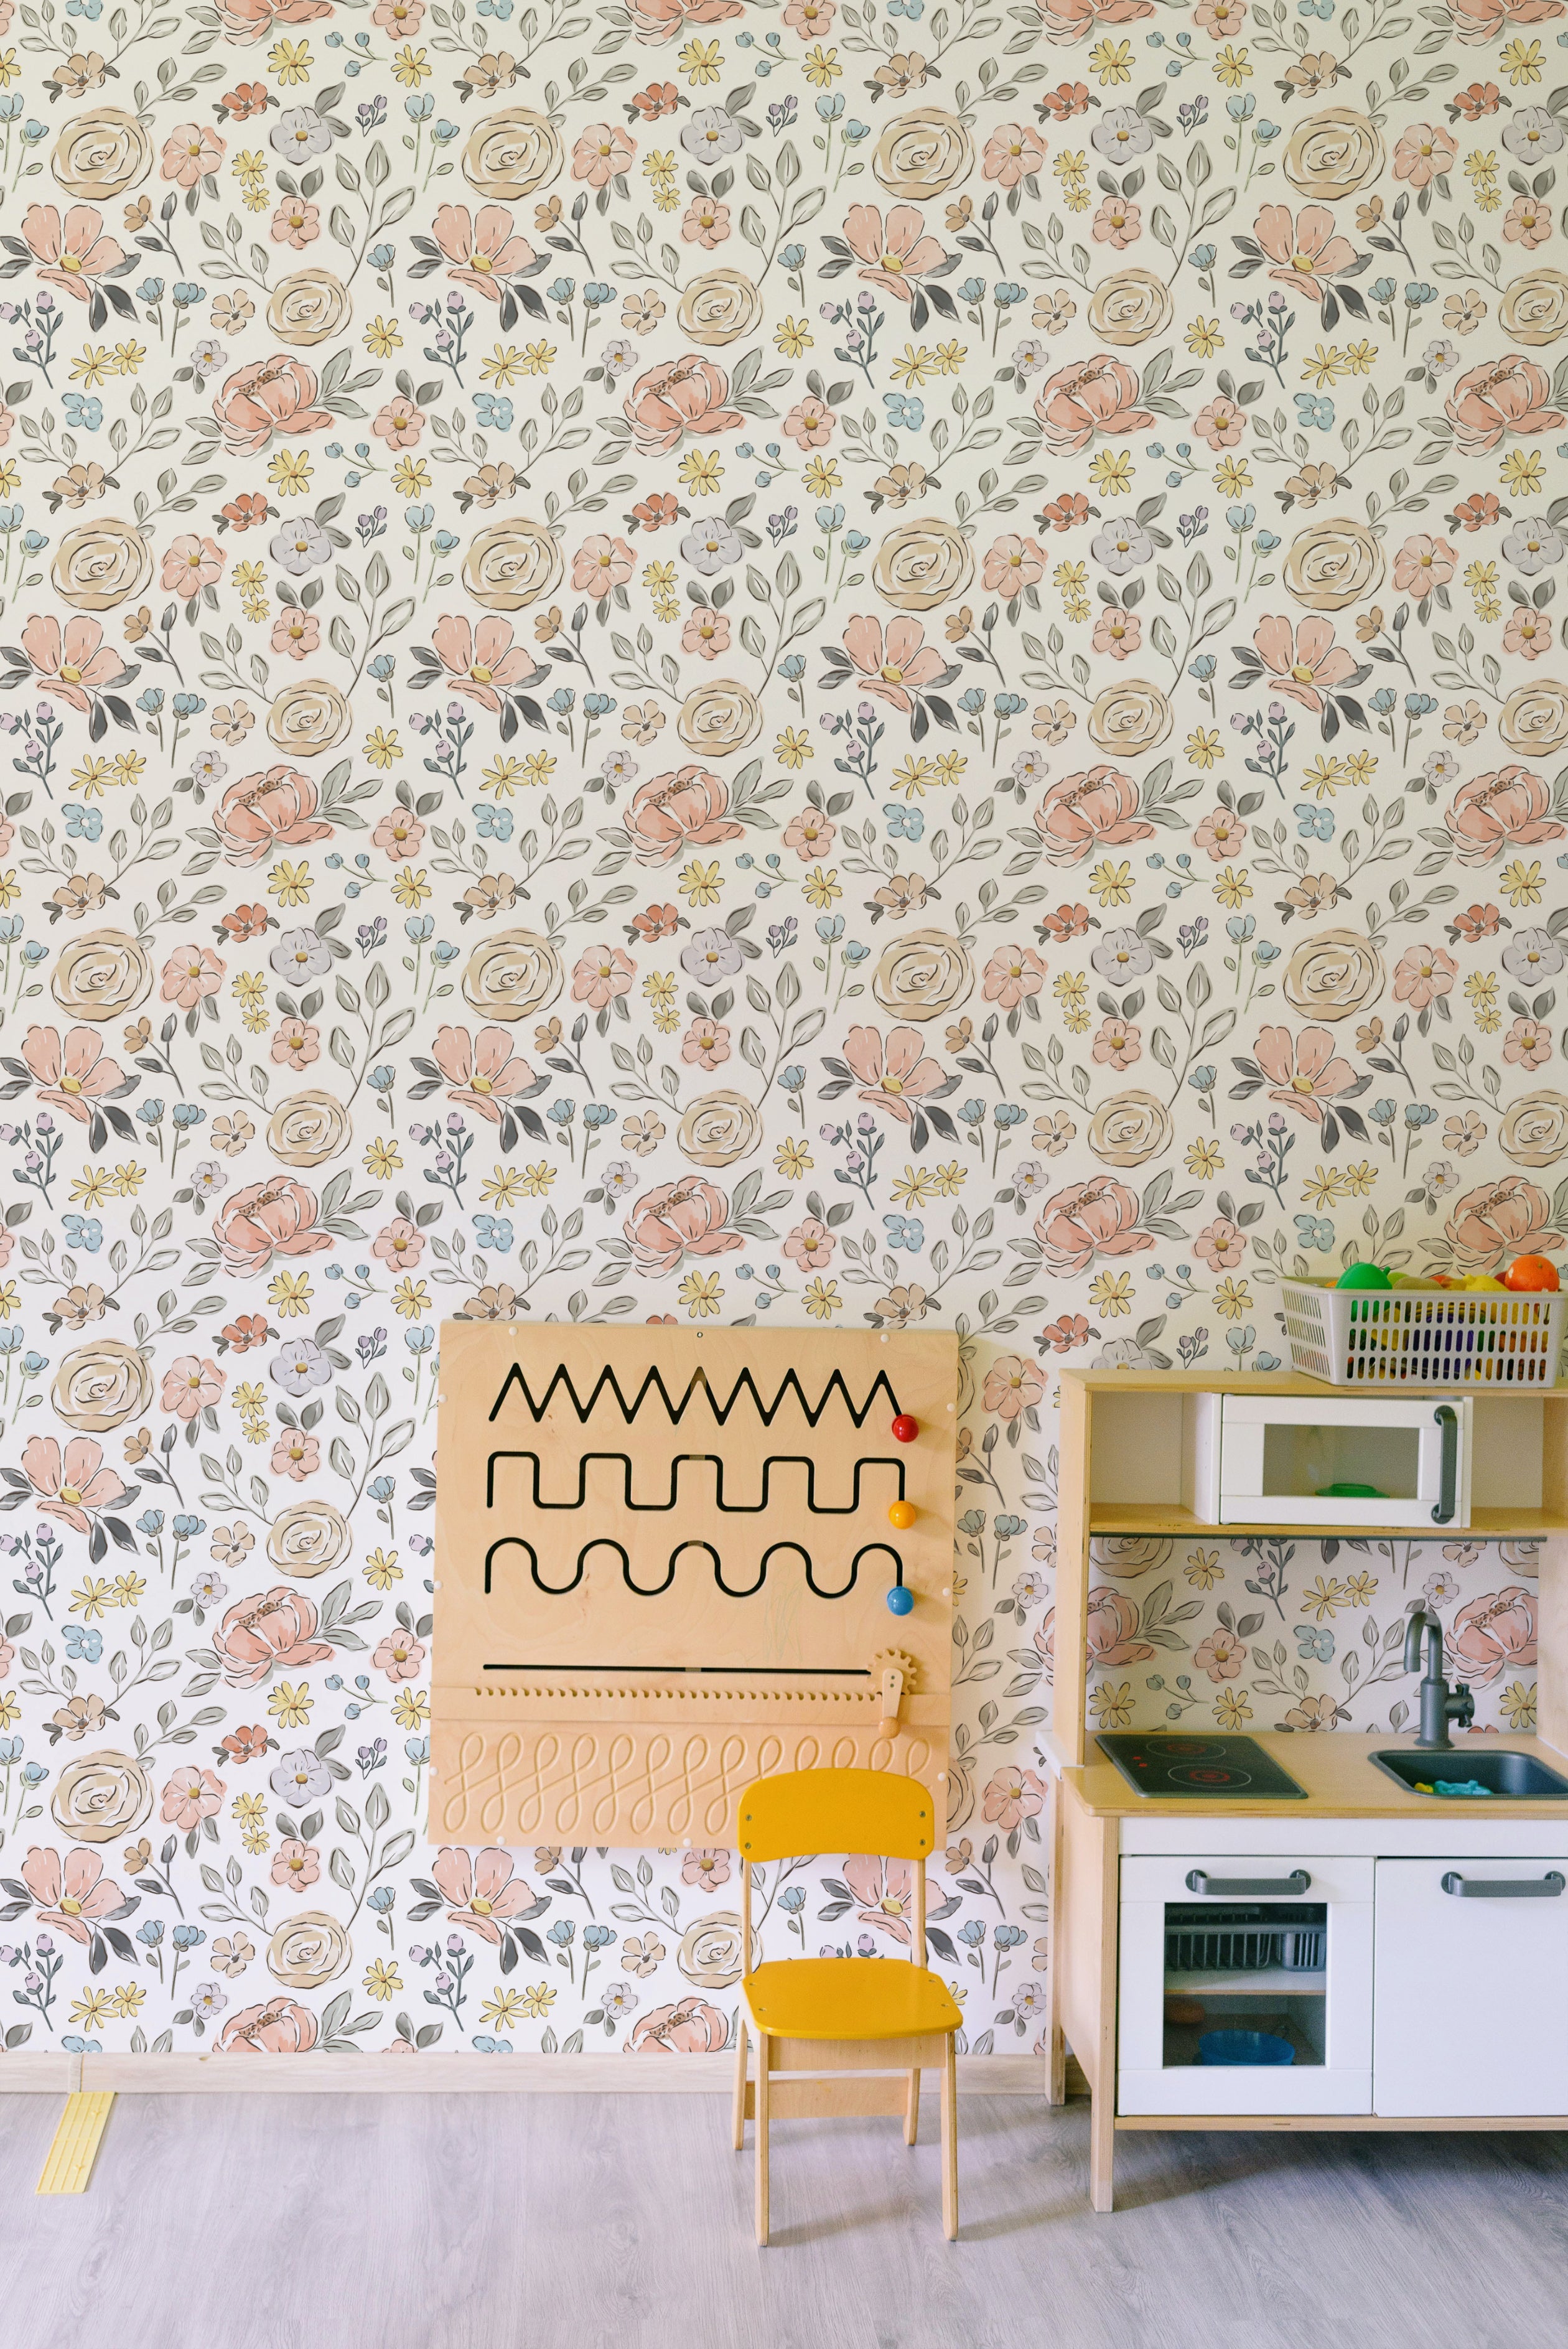 A serene workspace featuring the Nursery Blooming Wallpaper, adorned with a delicate floral pattern of pink and yellow flowers against a cream background, enhancing the creative charm of the space.